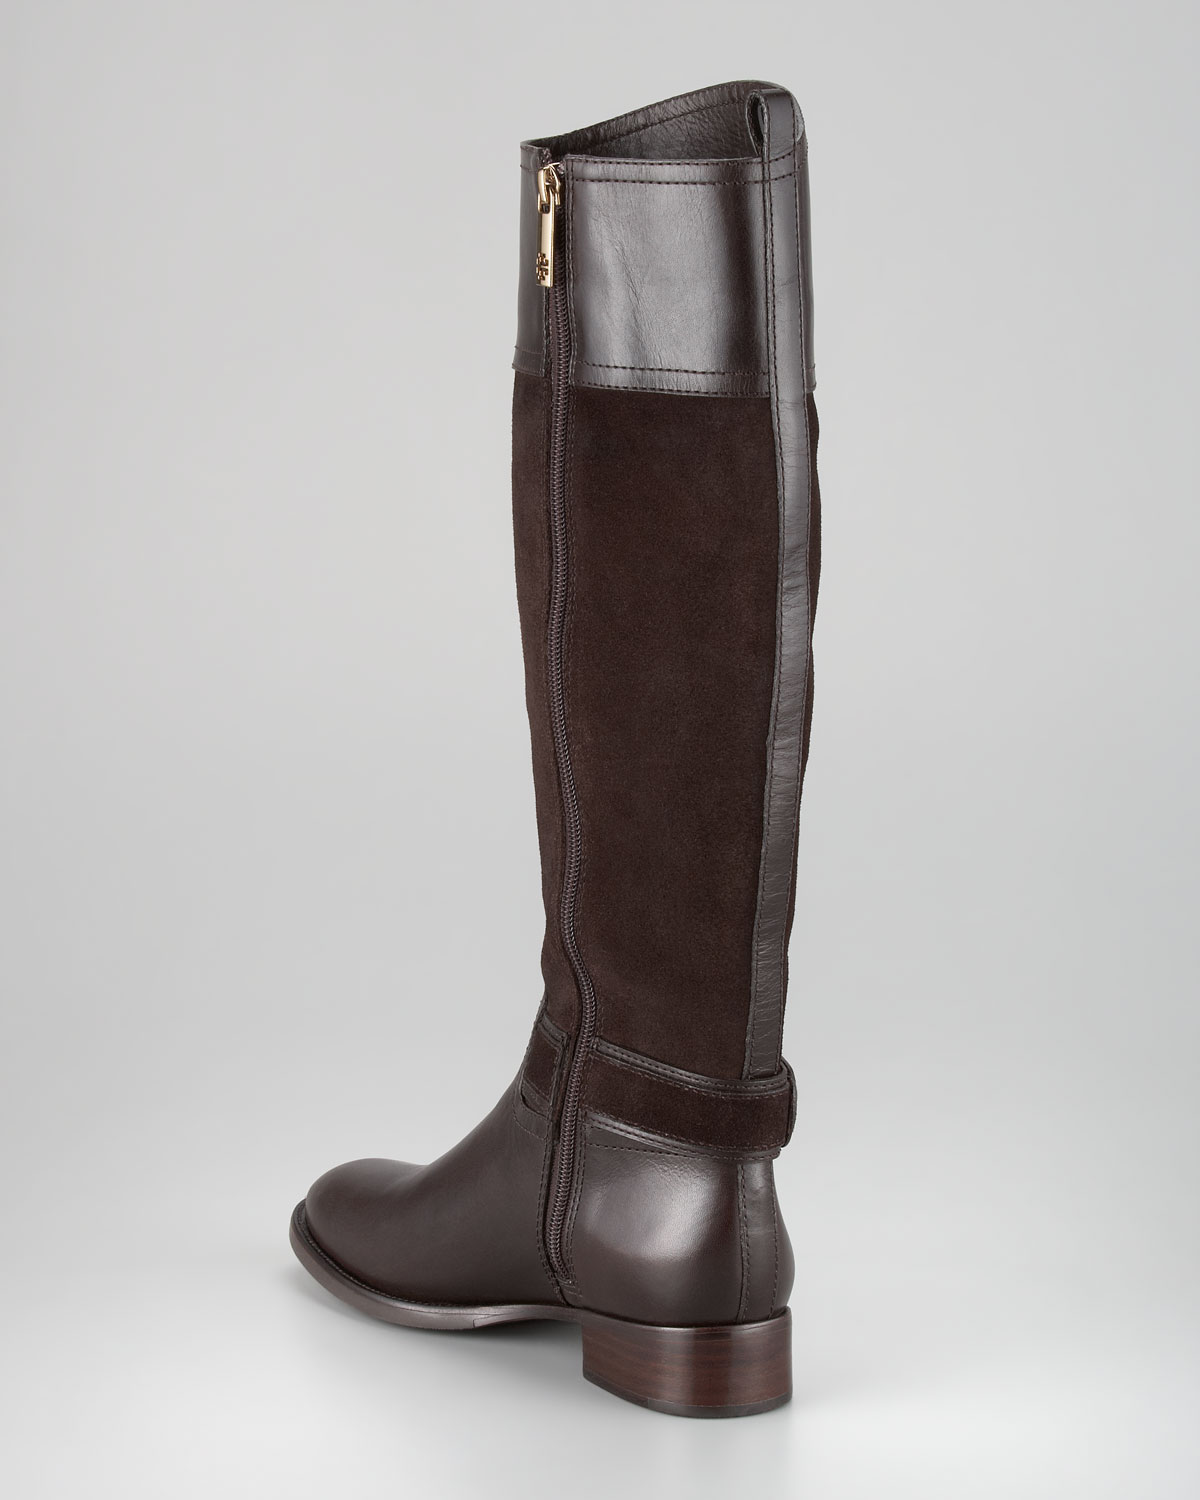 leather and suede riding boots